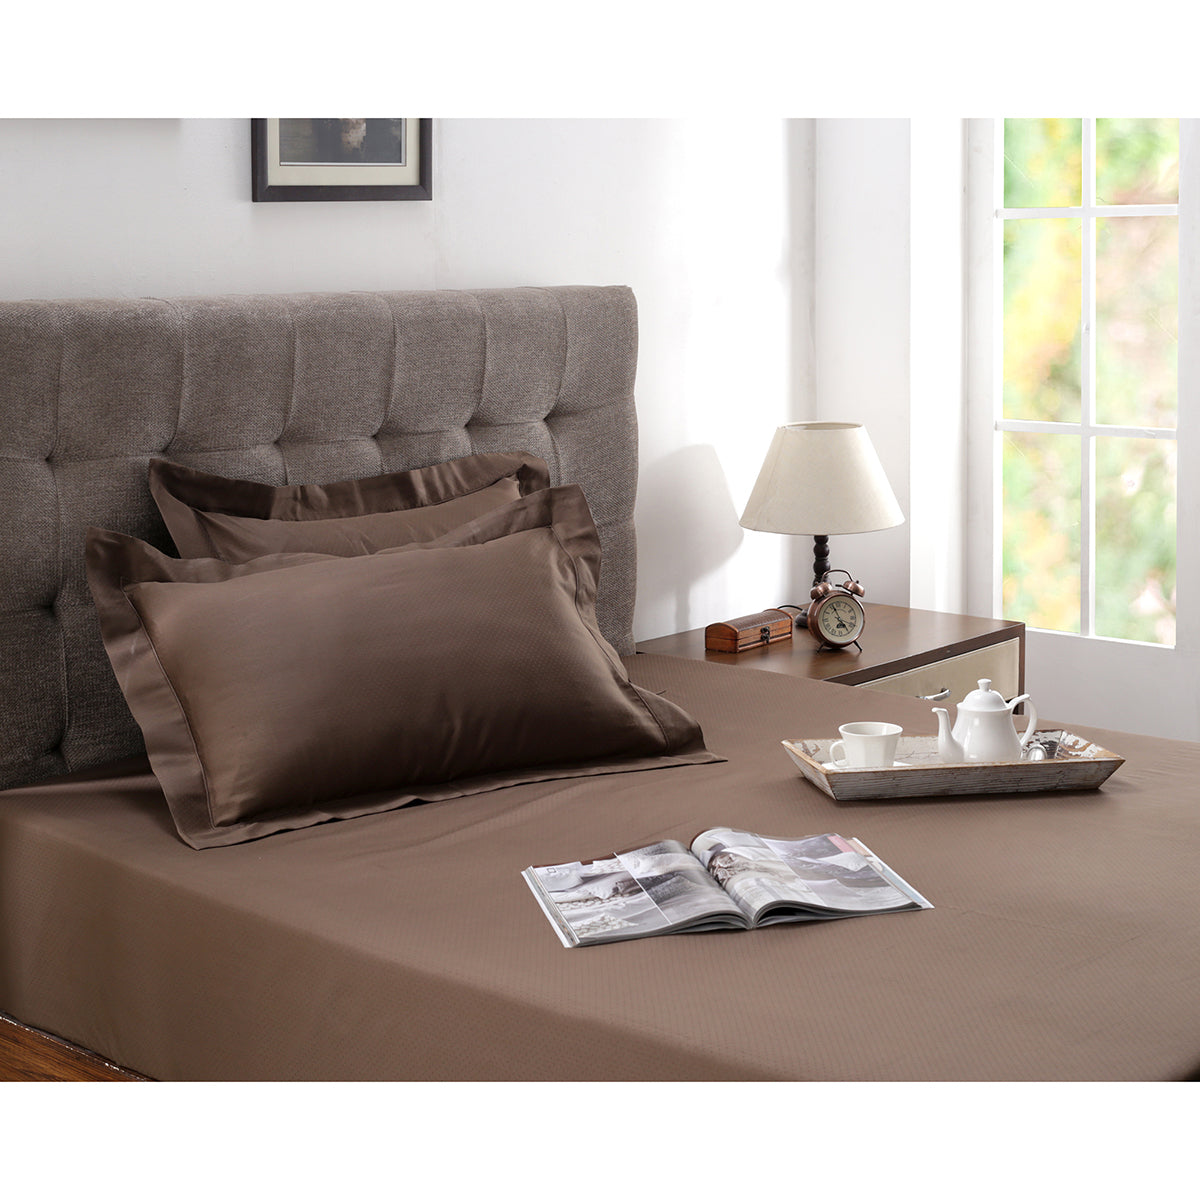 Clemonte Self Jacquard 100% Cotton Chocolate Chip Bed Sheet